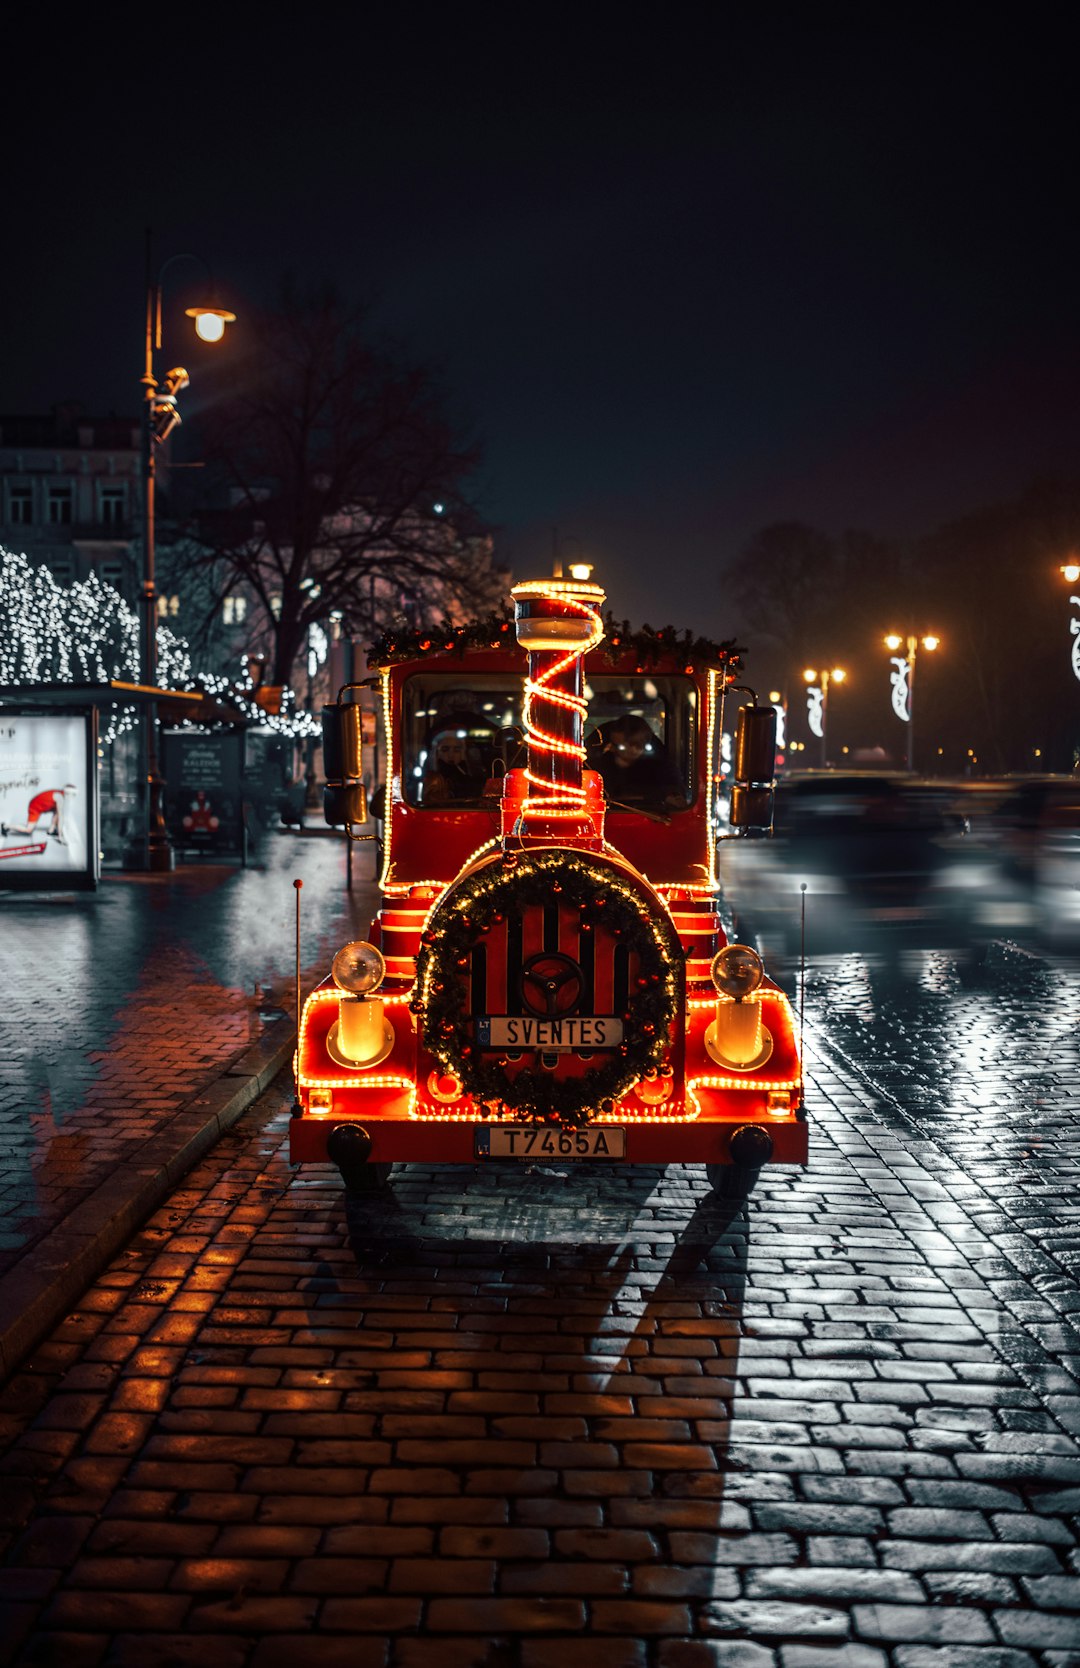 red and black train with lighted string lights during night time